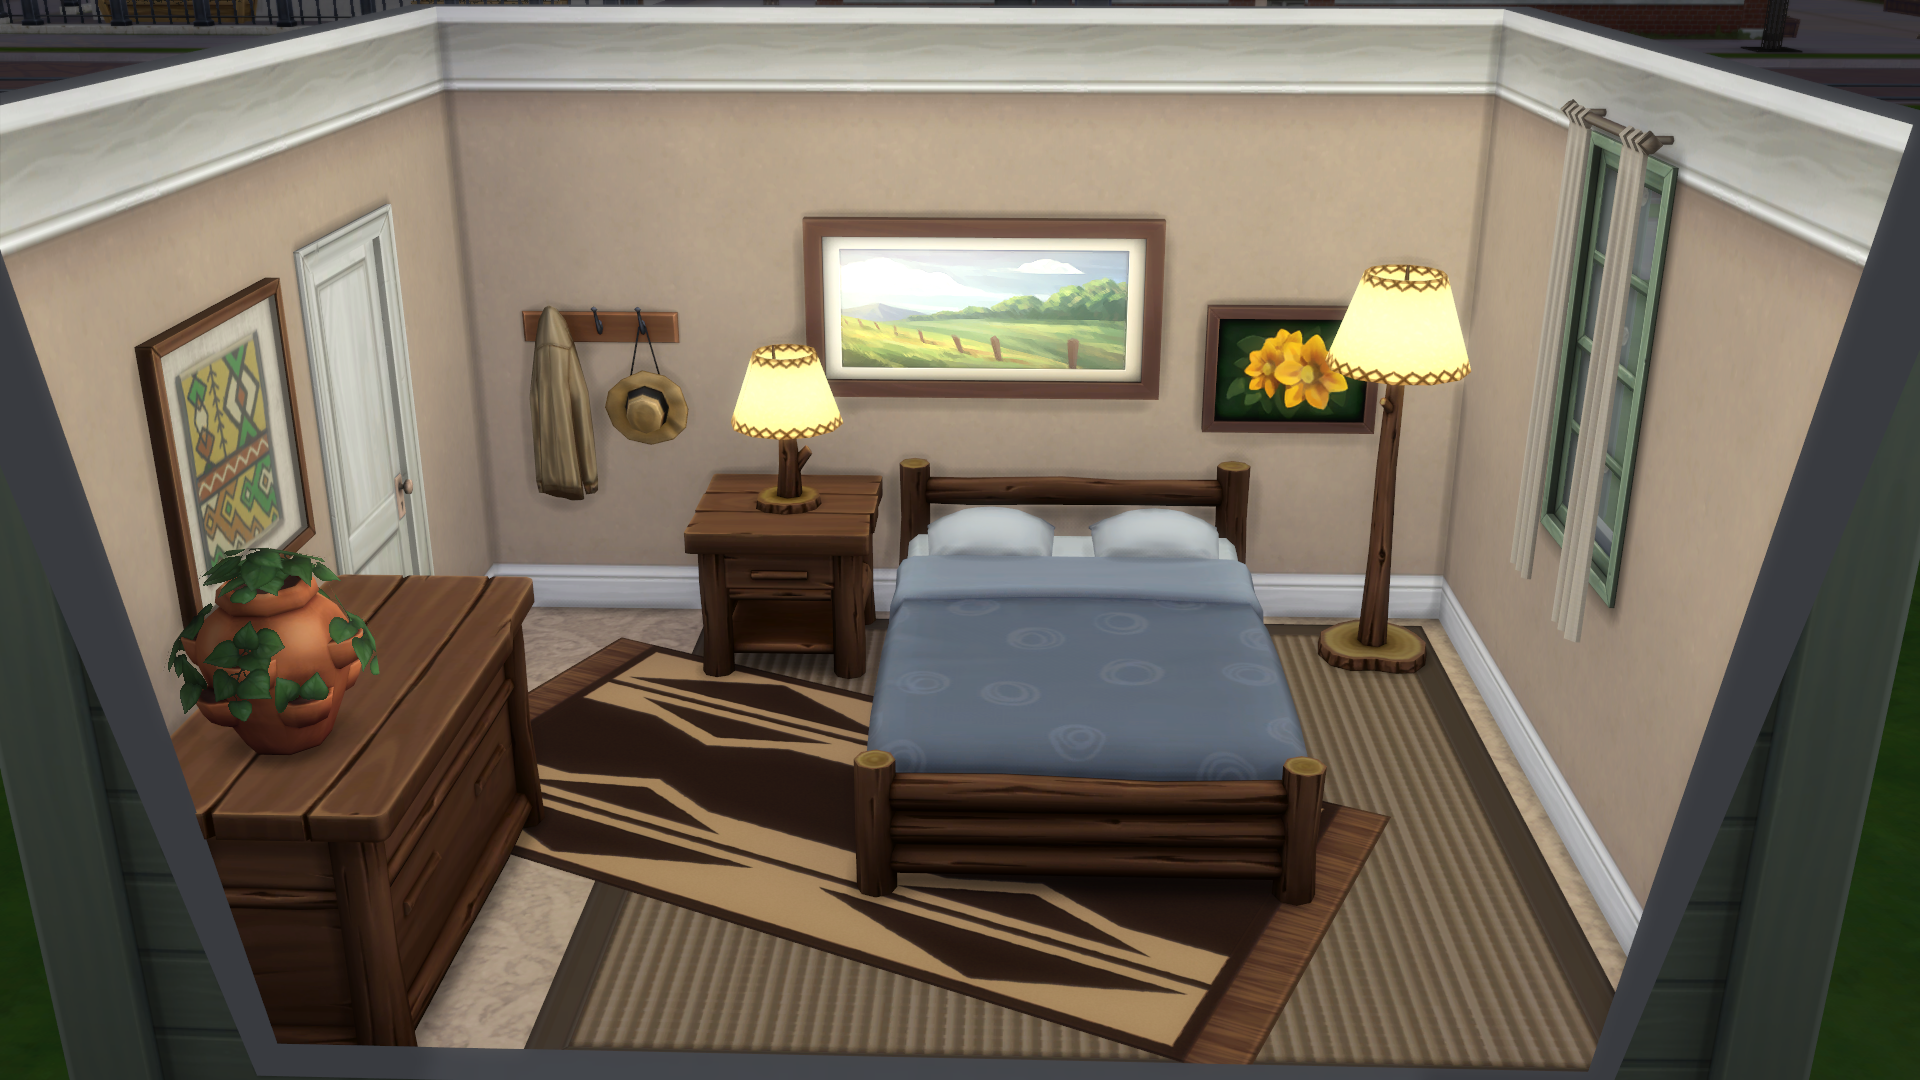 Bedroom Sims 4